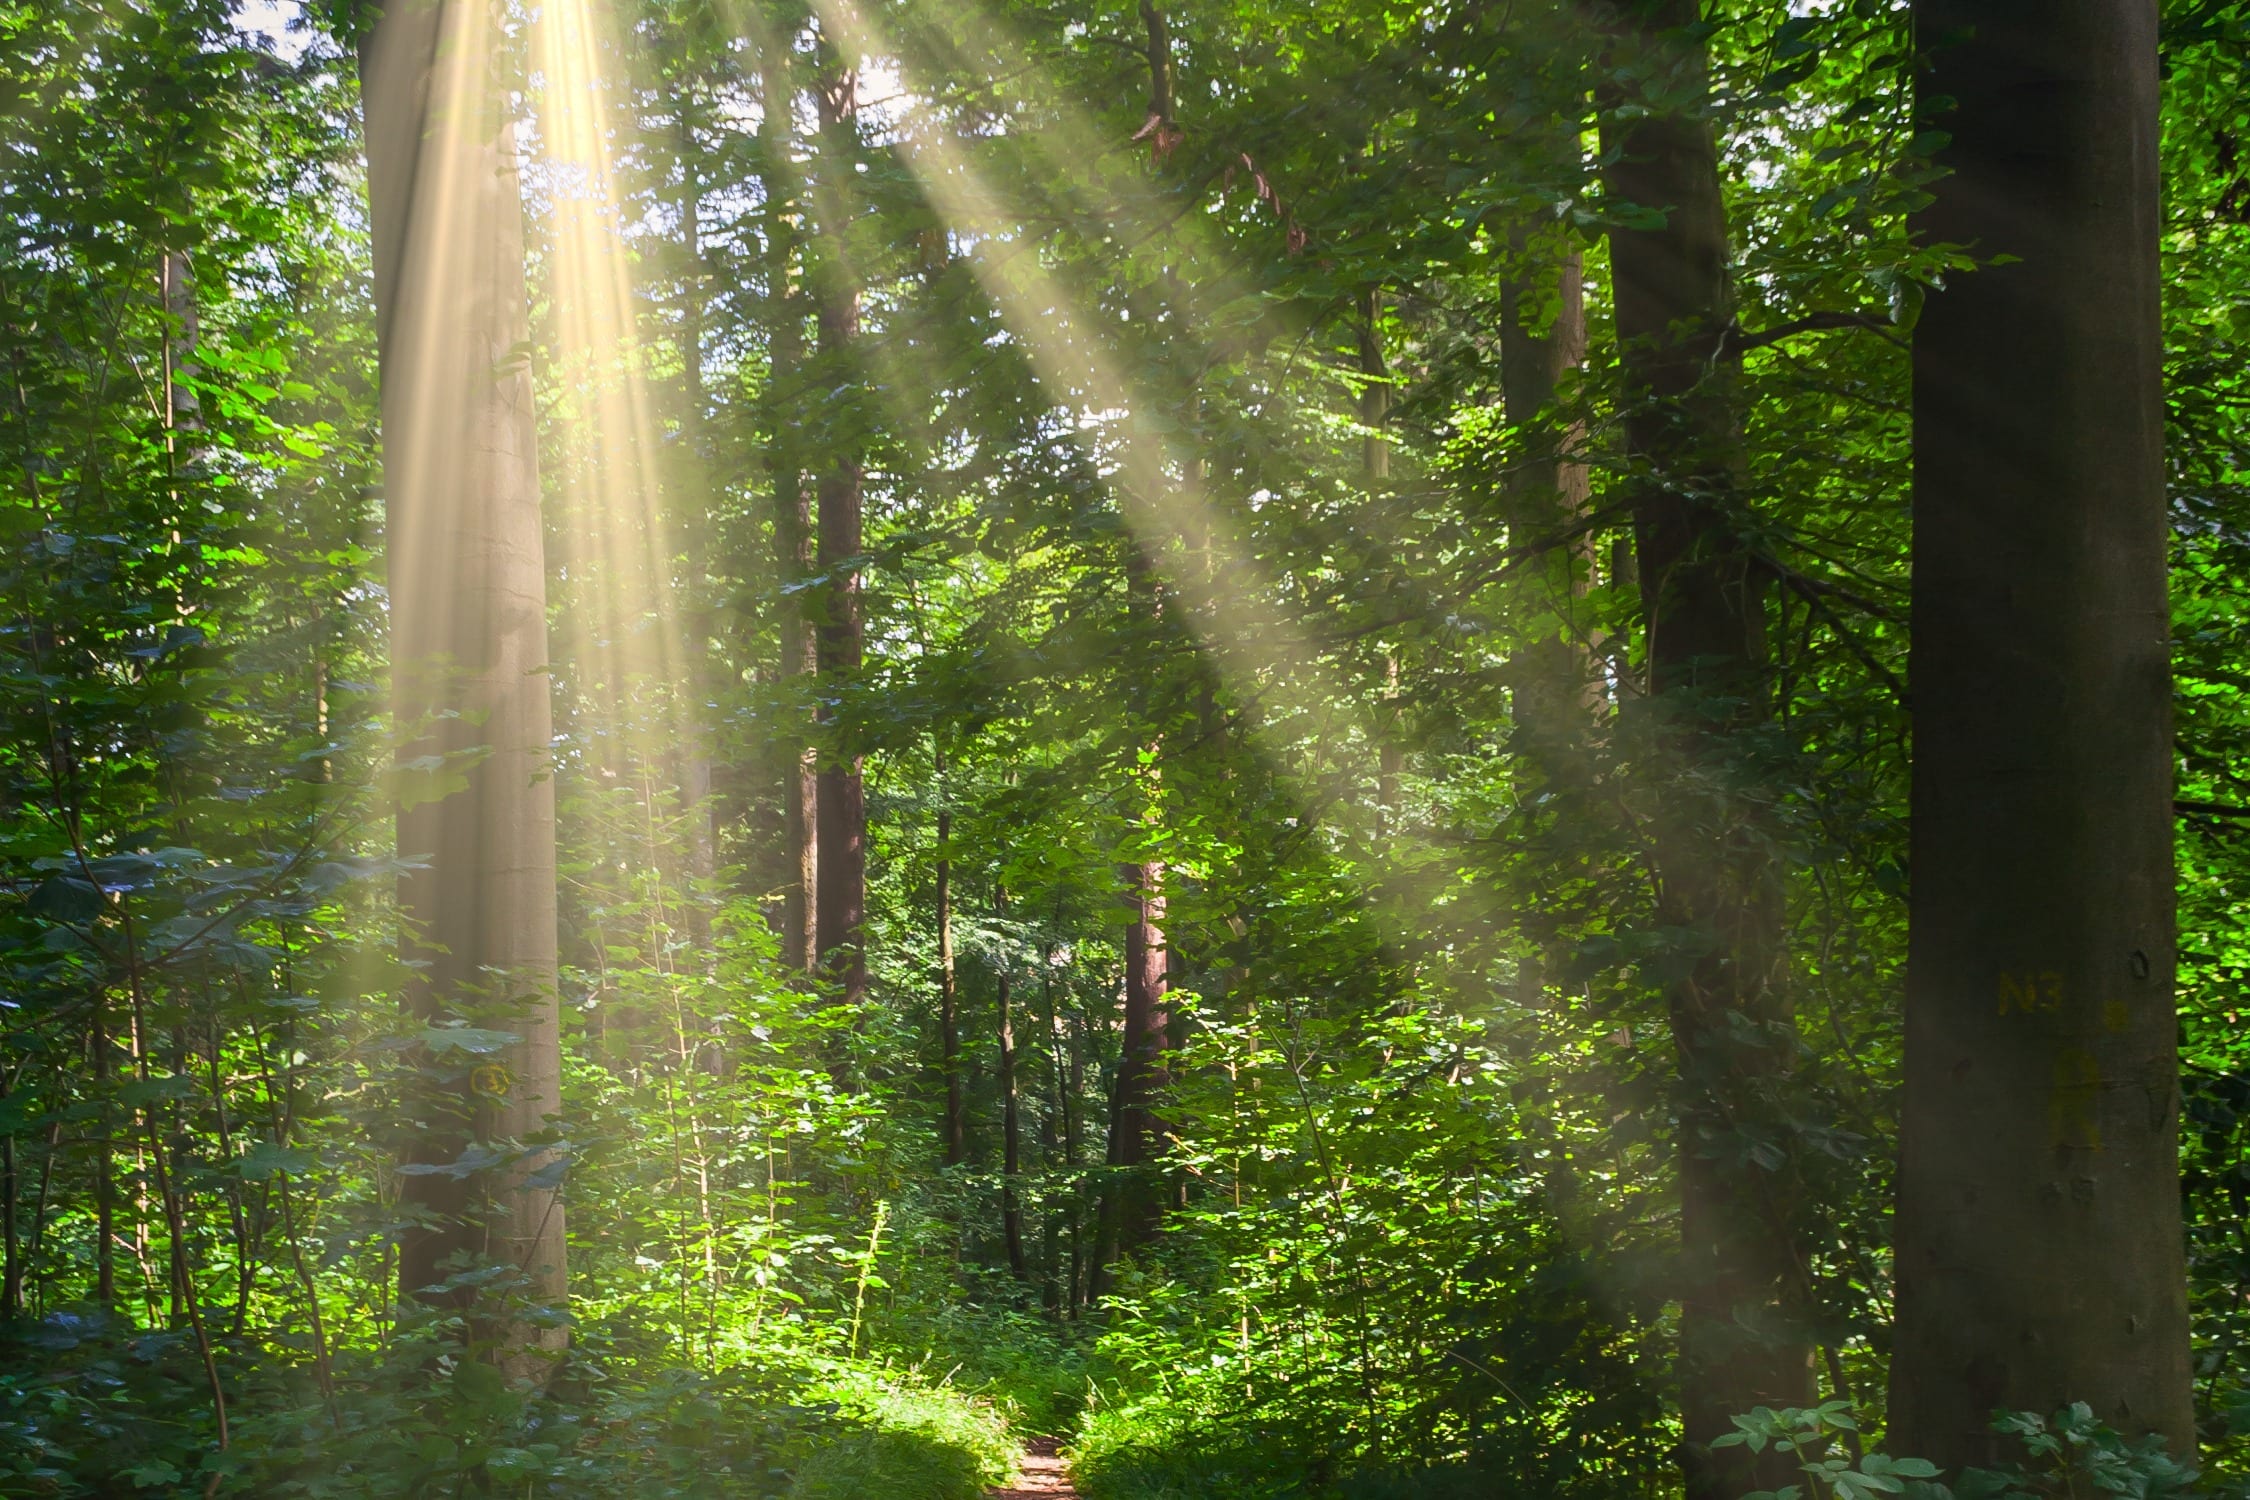 Image of sunlight passing through the trees in a leafy green forest.